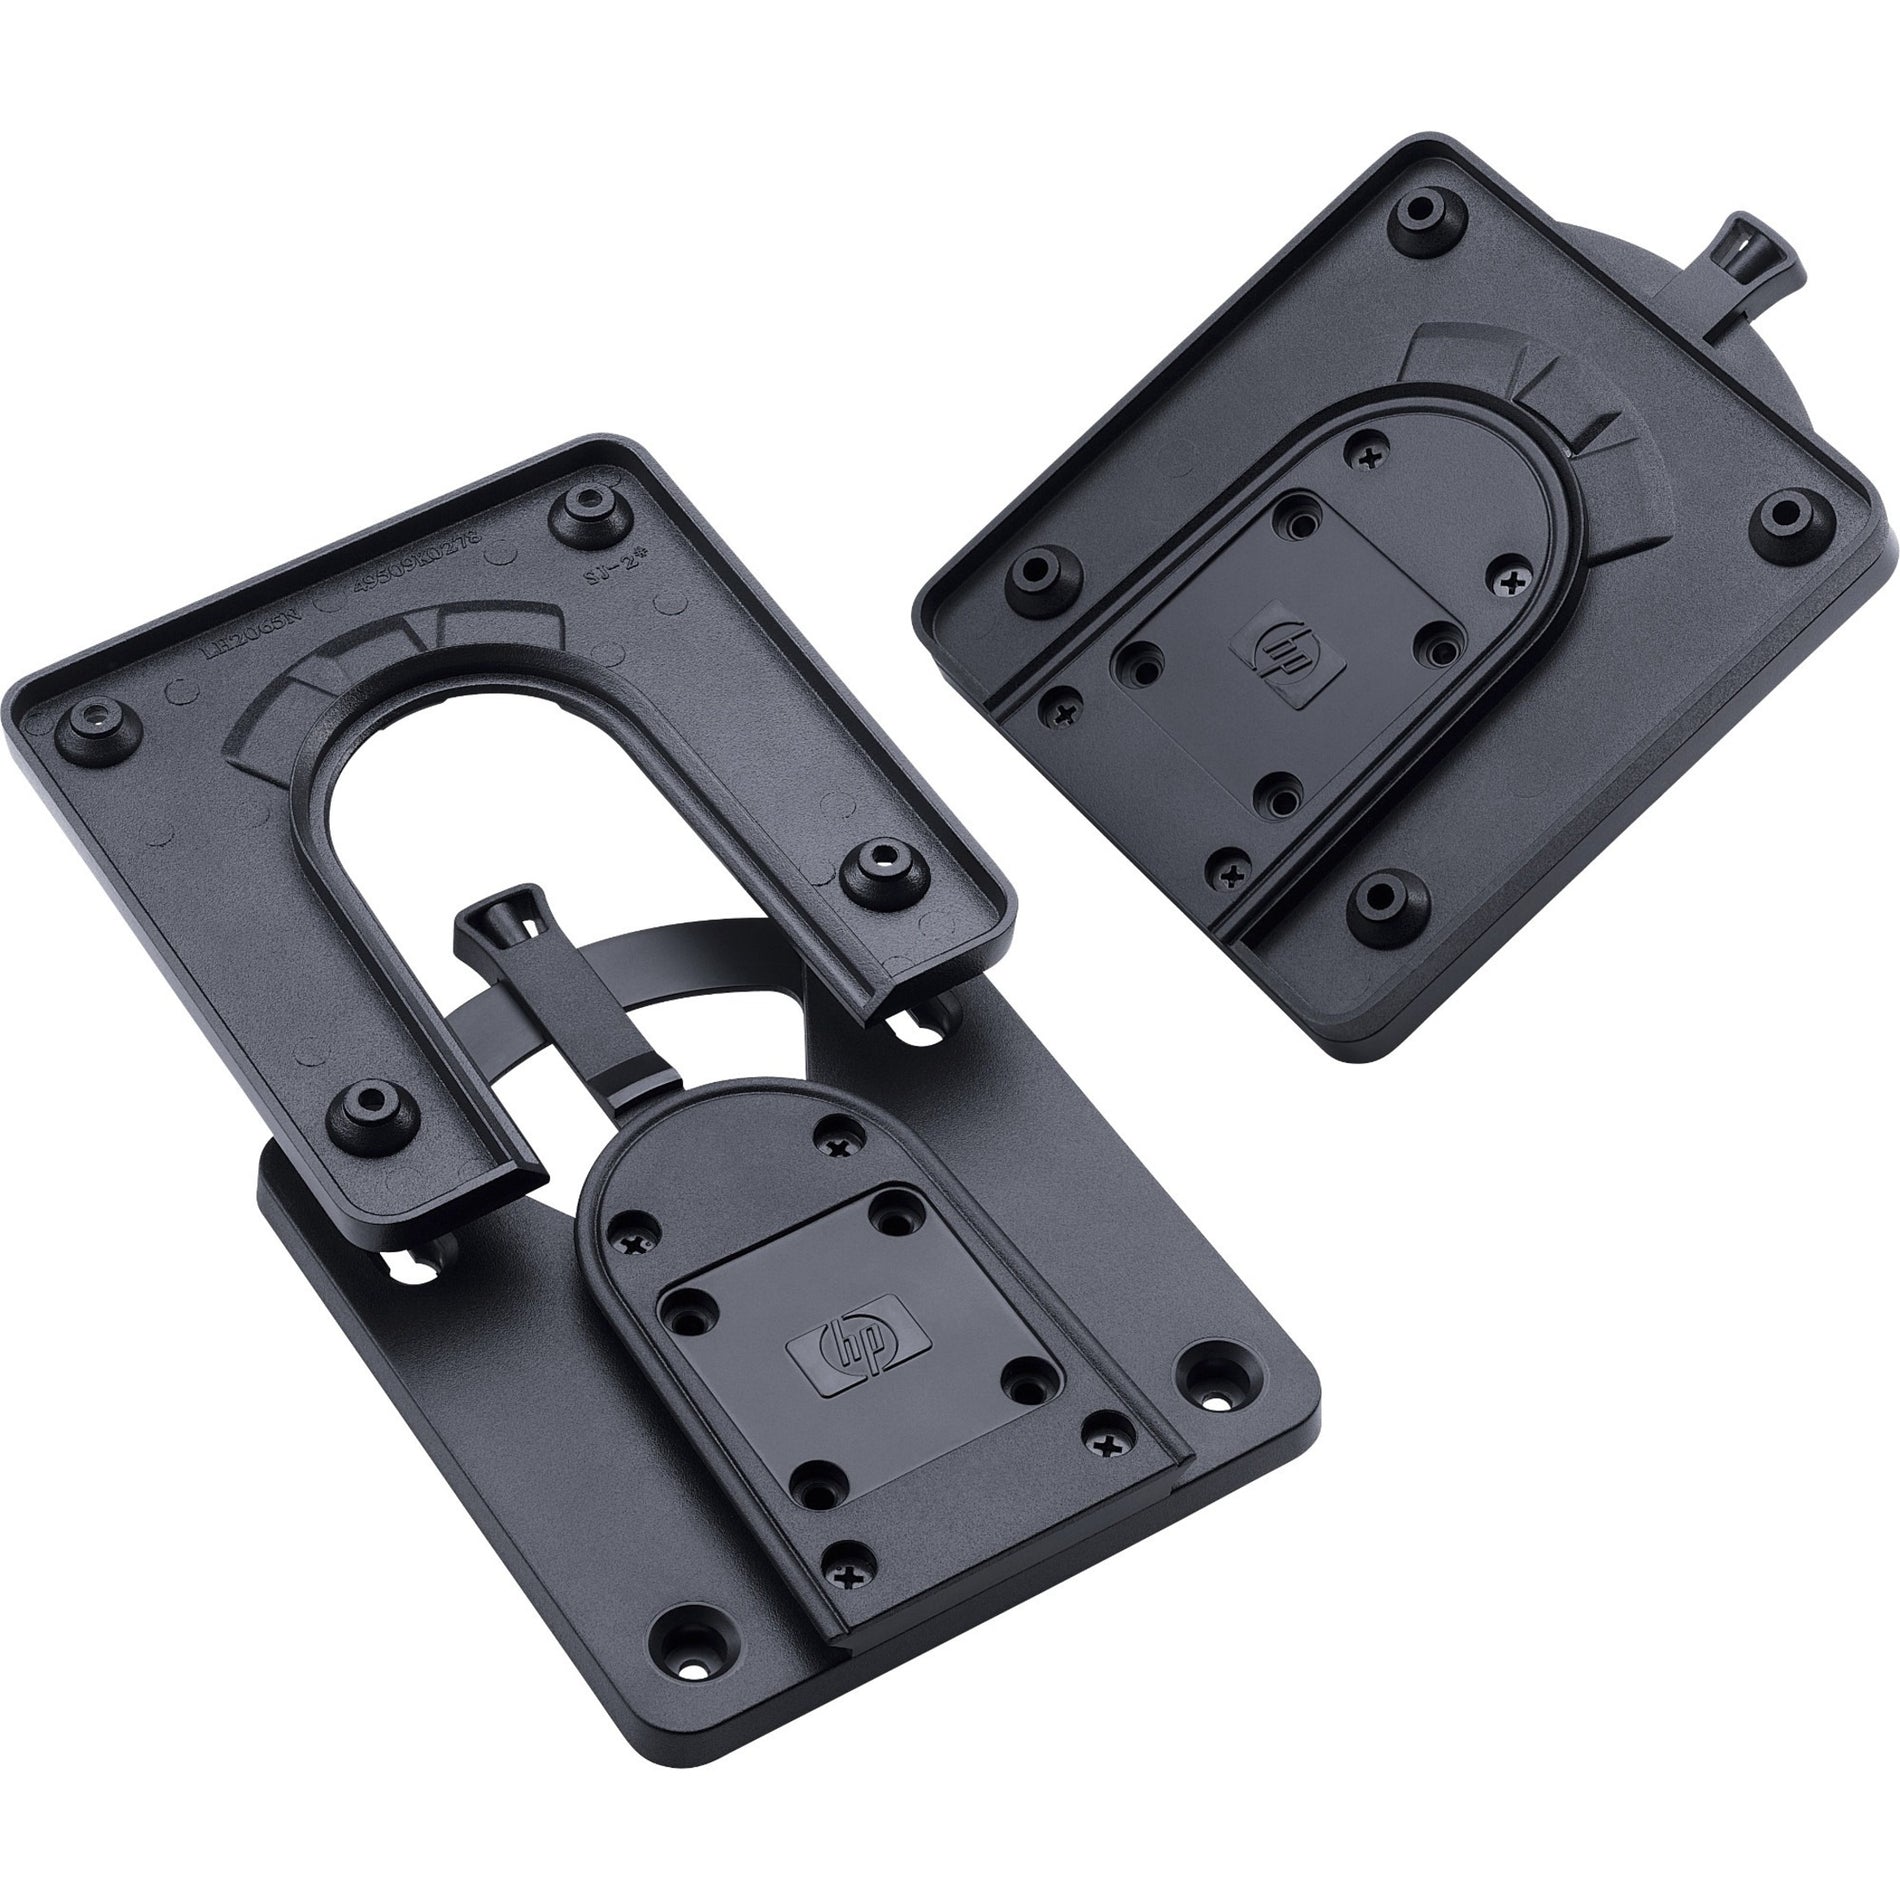 HP 6KD15AT Quick Release Bracket 2, Mount Your LCD Monitor or Flat Panel Display with Ease